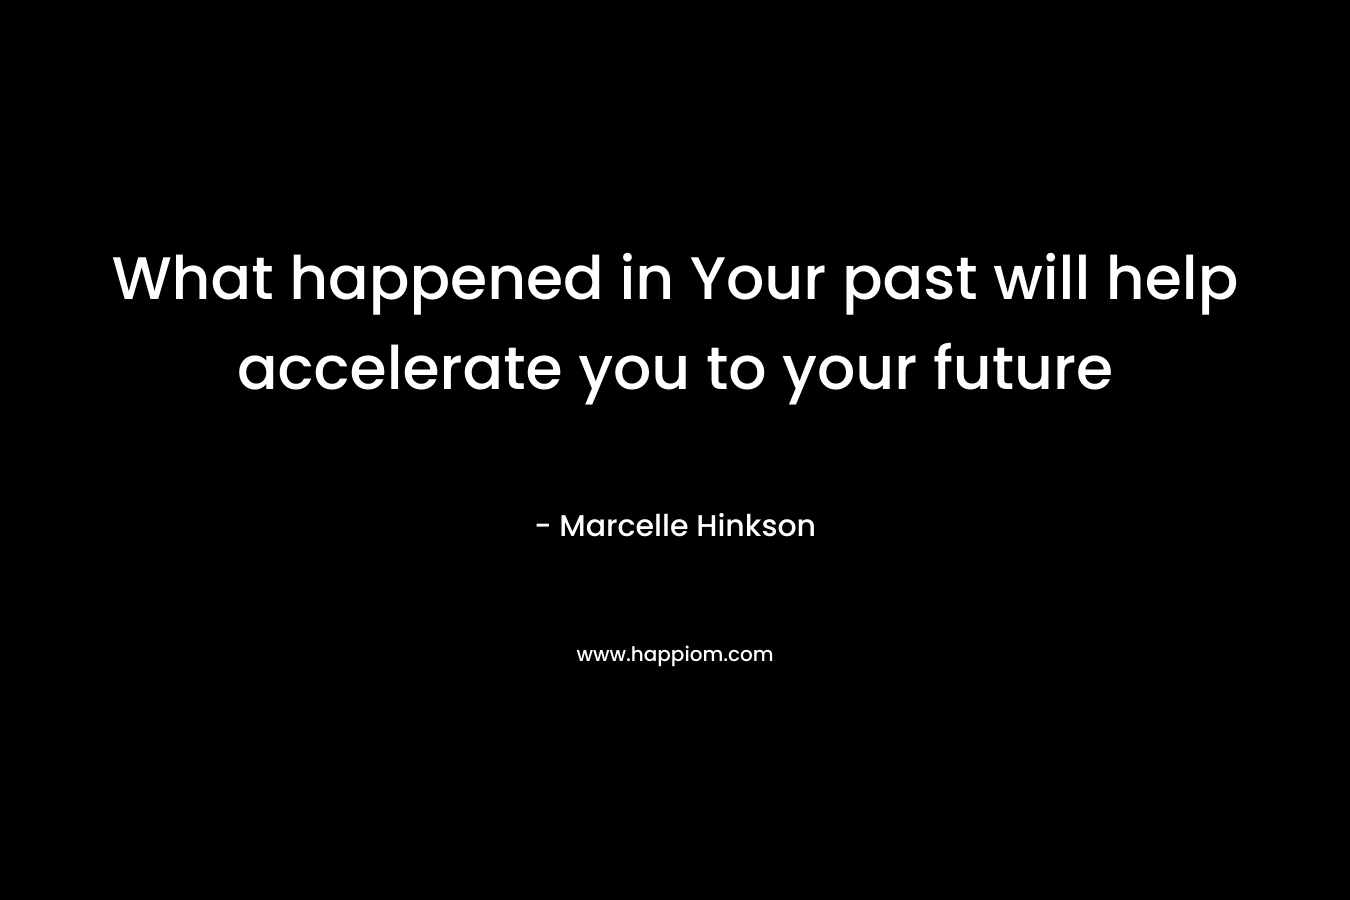 What happened in Your past will help accelerate you to your future